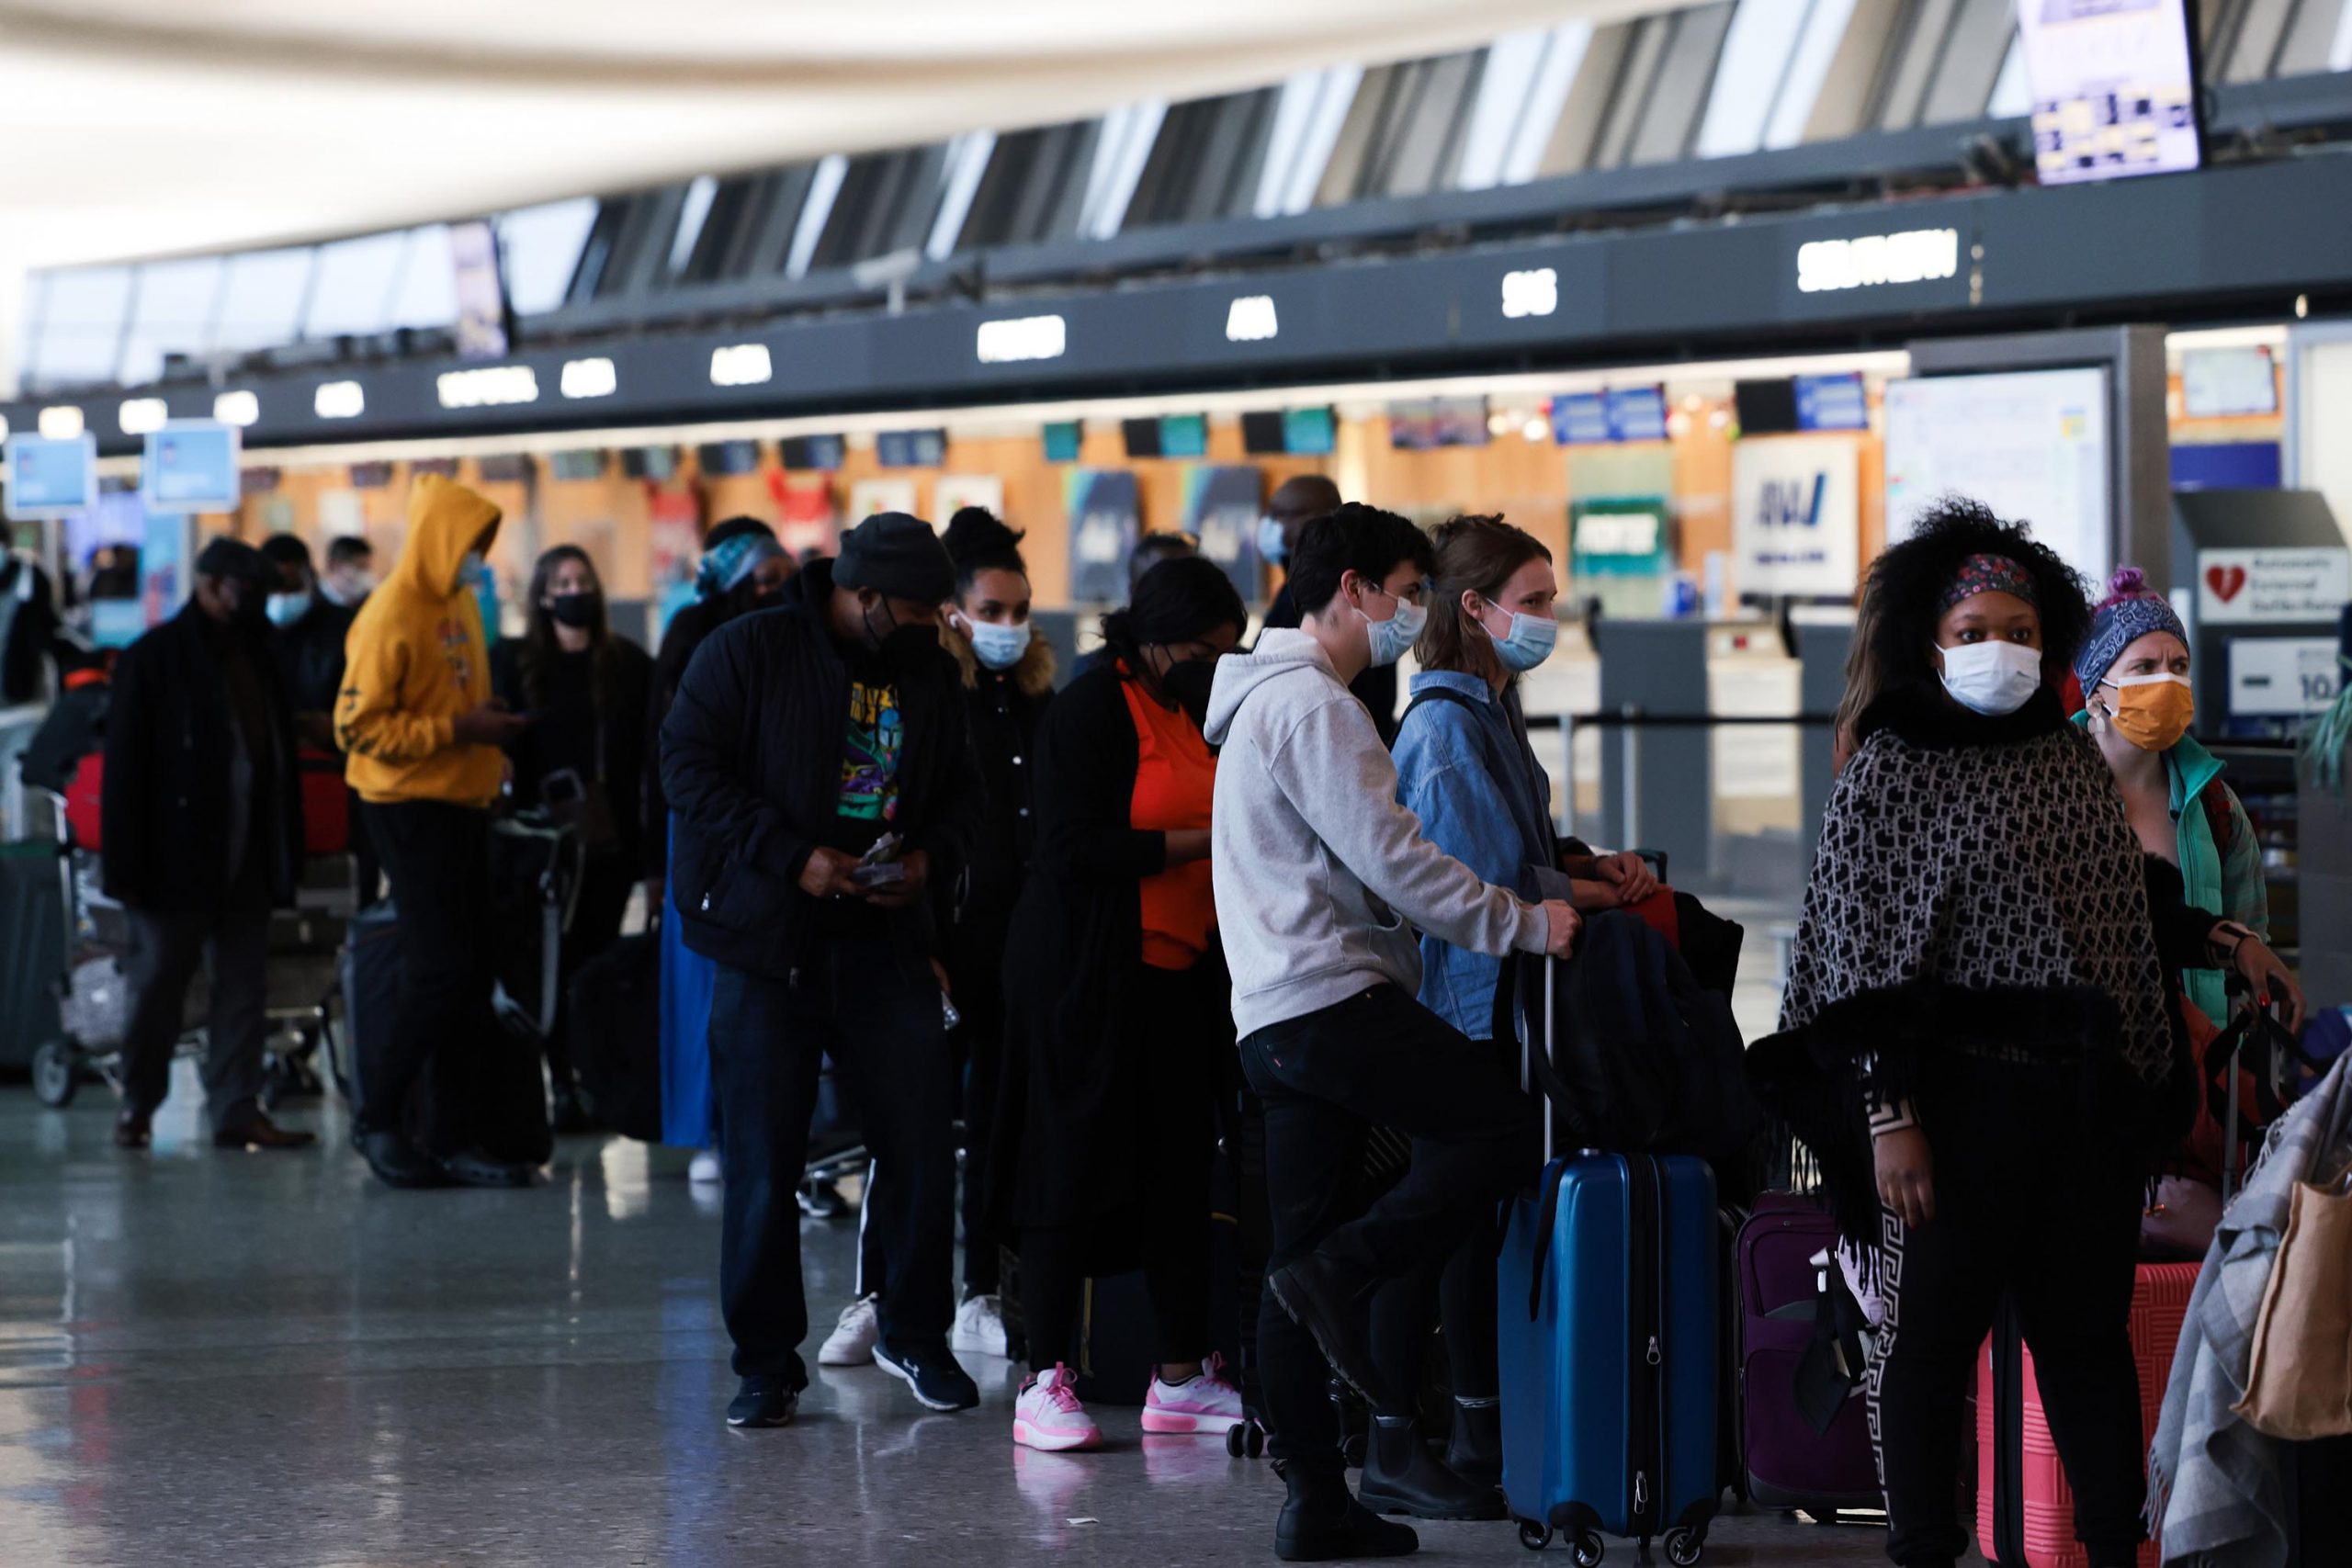 DULLES, VIRGINIA - DECEMBER 27: Passengers wait in line to check in for their flights at the Dulles...